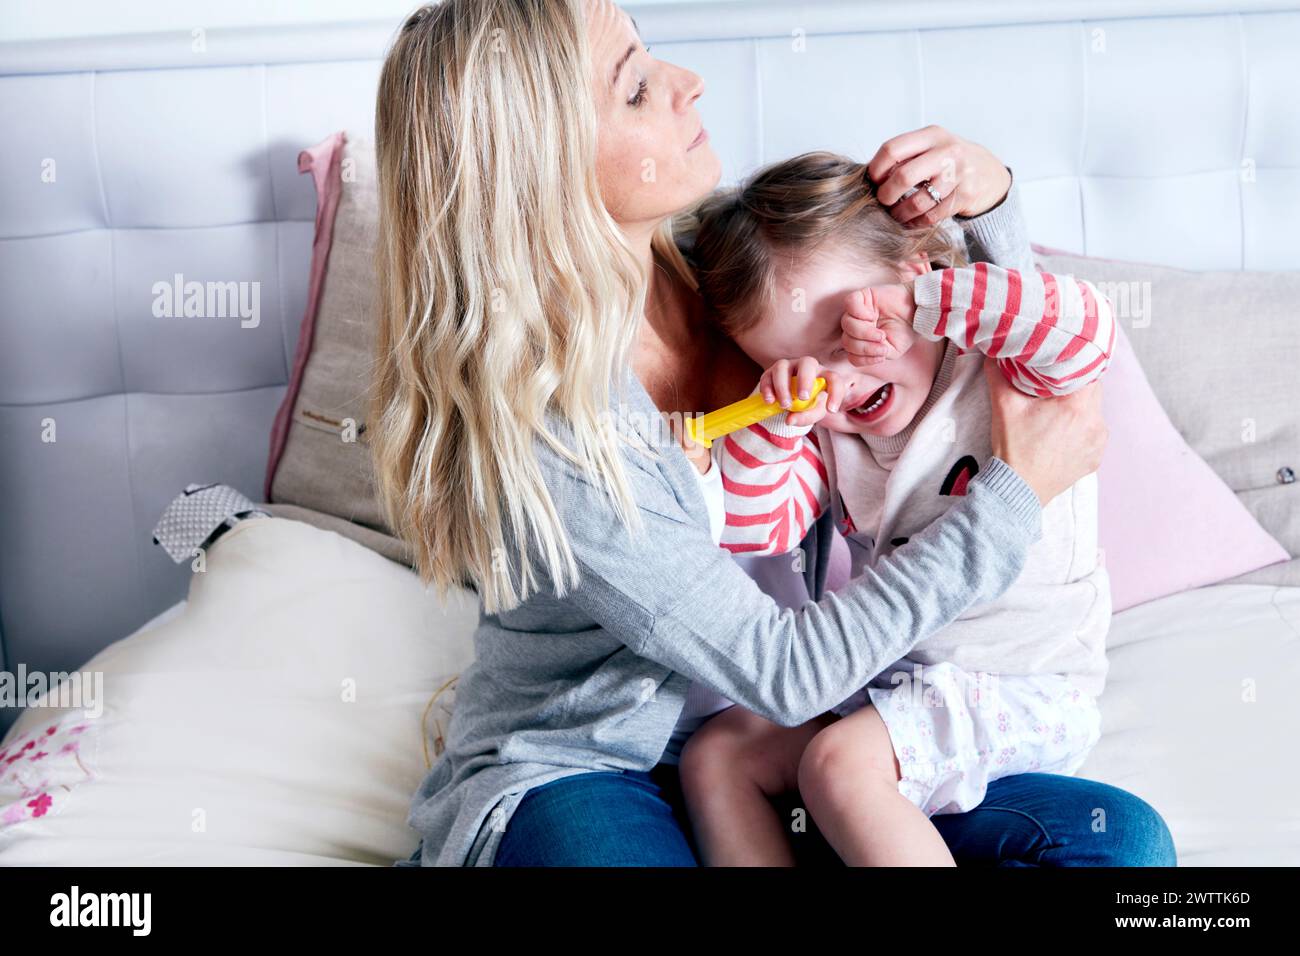 Mother comforting crying child on bed Stock Photo